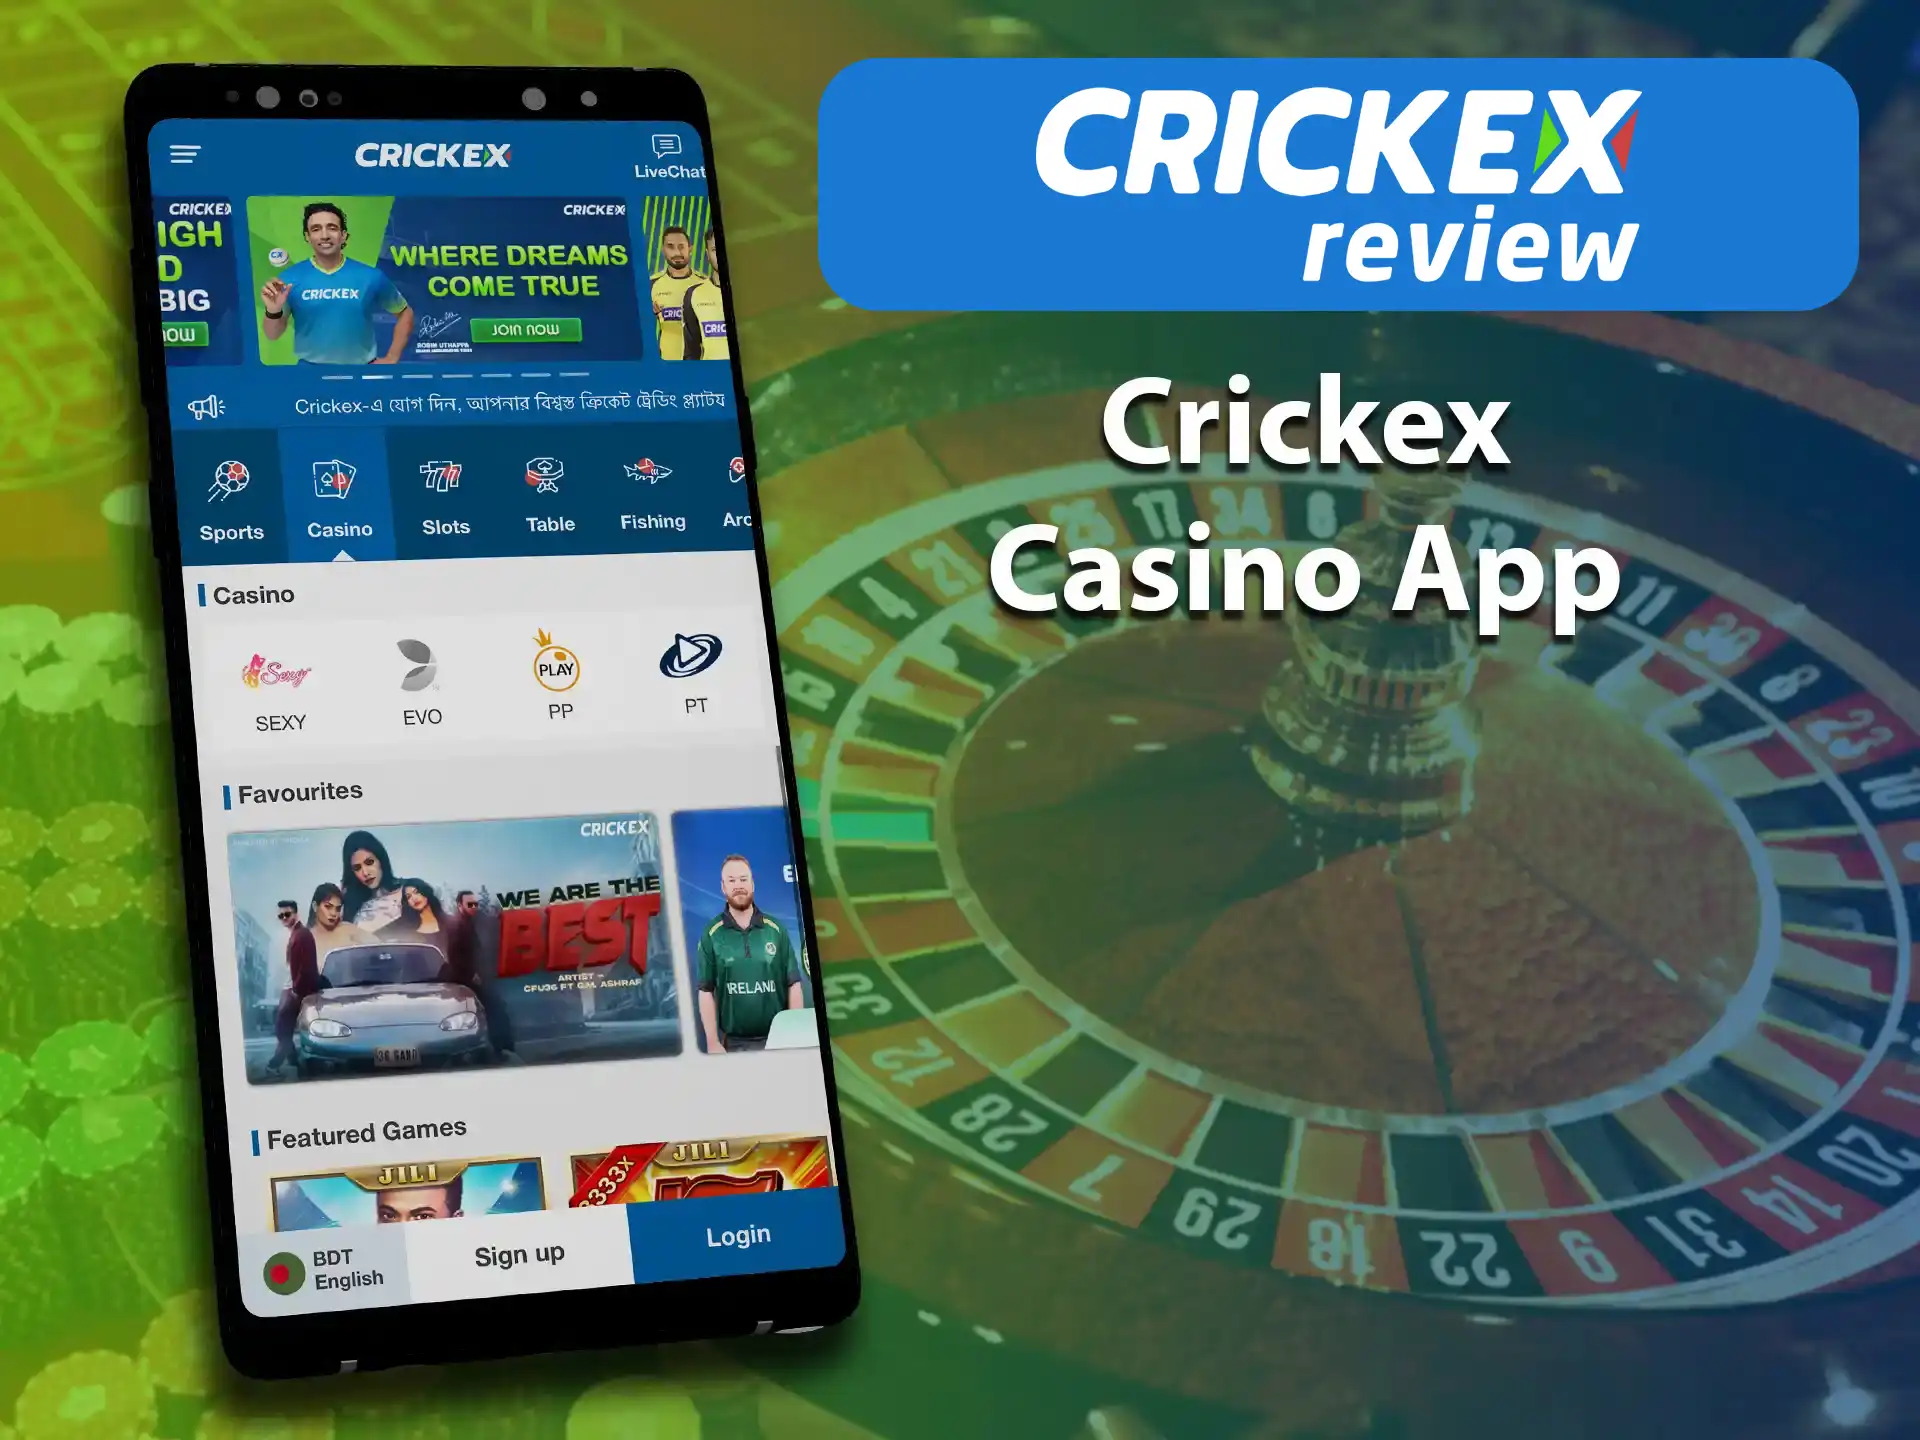 Online casino Crickex has all the popular and classic games and also the slot machines section.